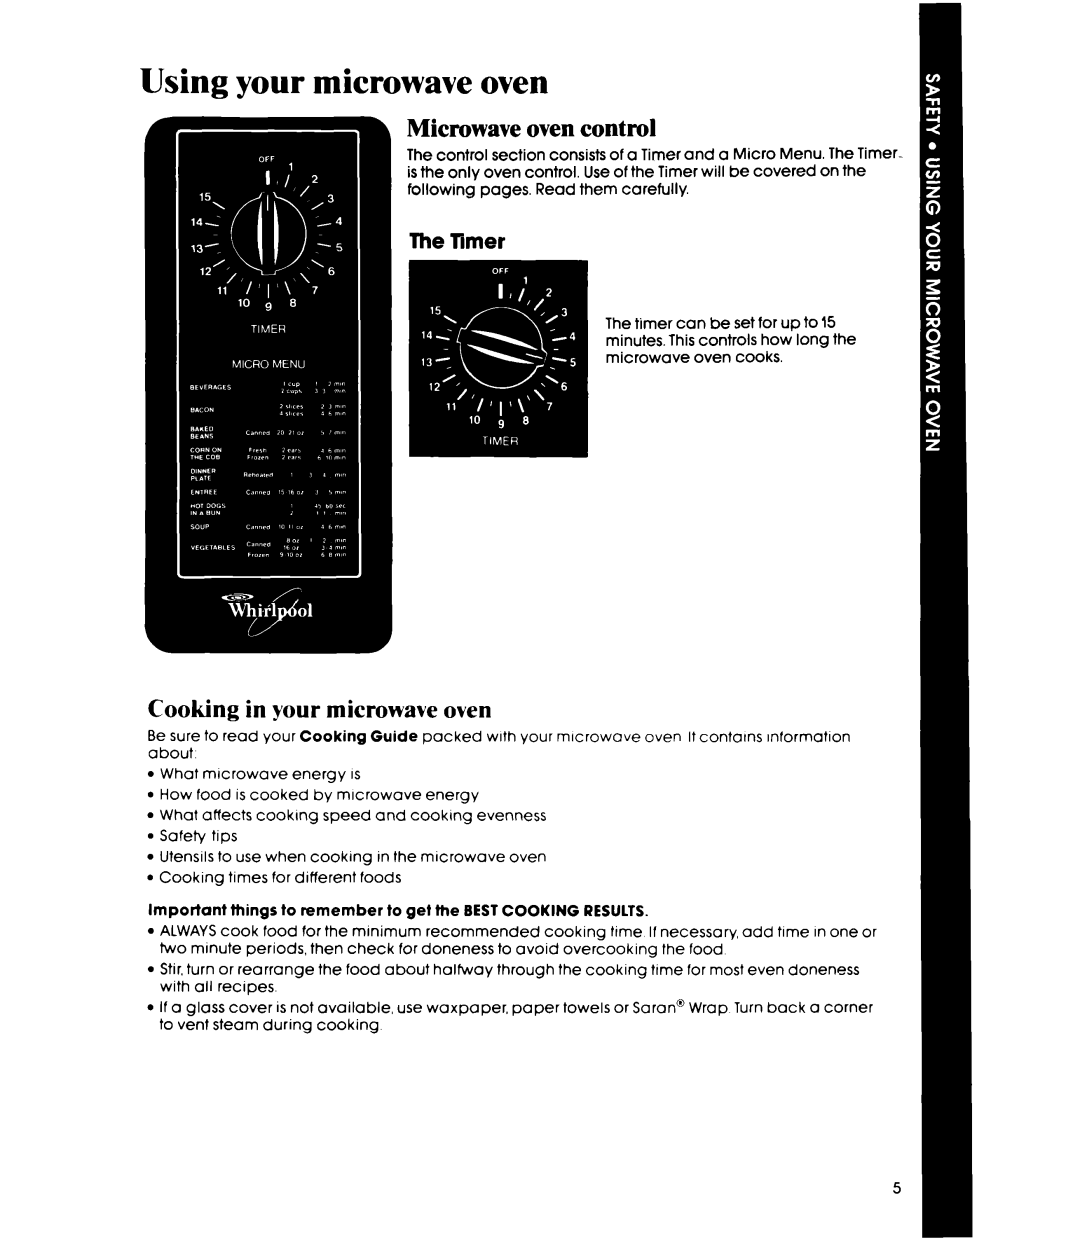 Whirlpool MW3OOOXP manual Using your microwave oven, Microwave oven control, Cooking in your microwave oven 